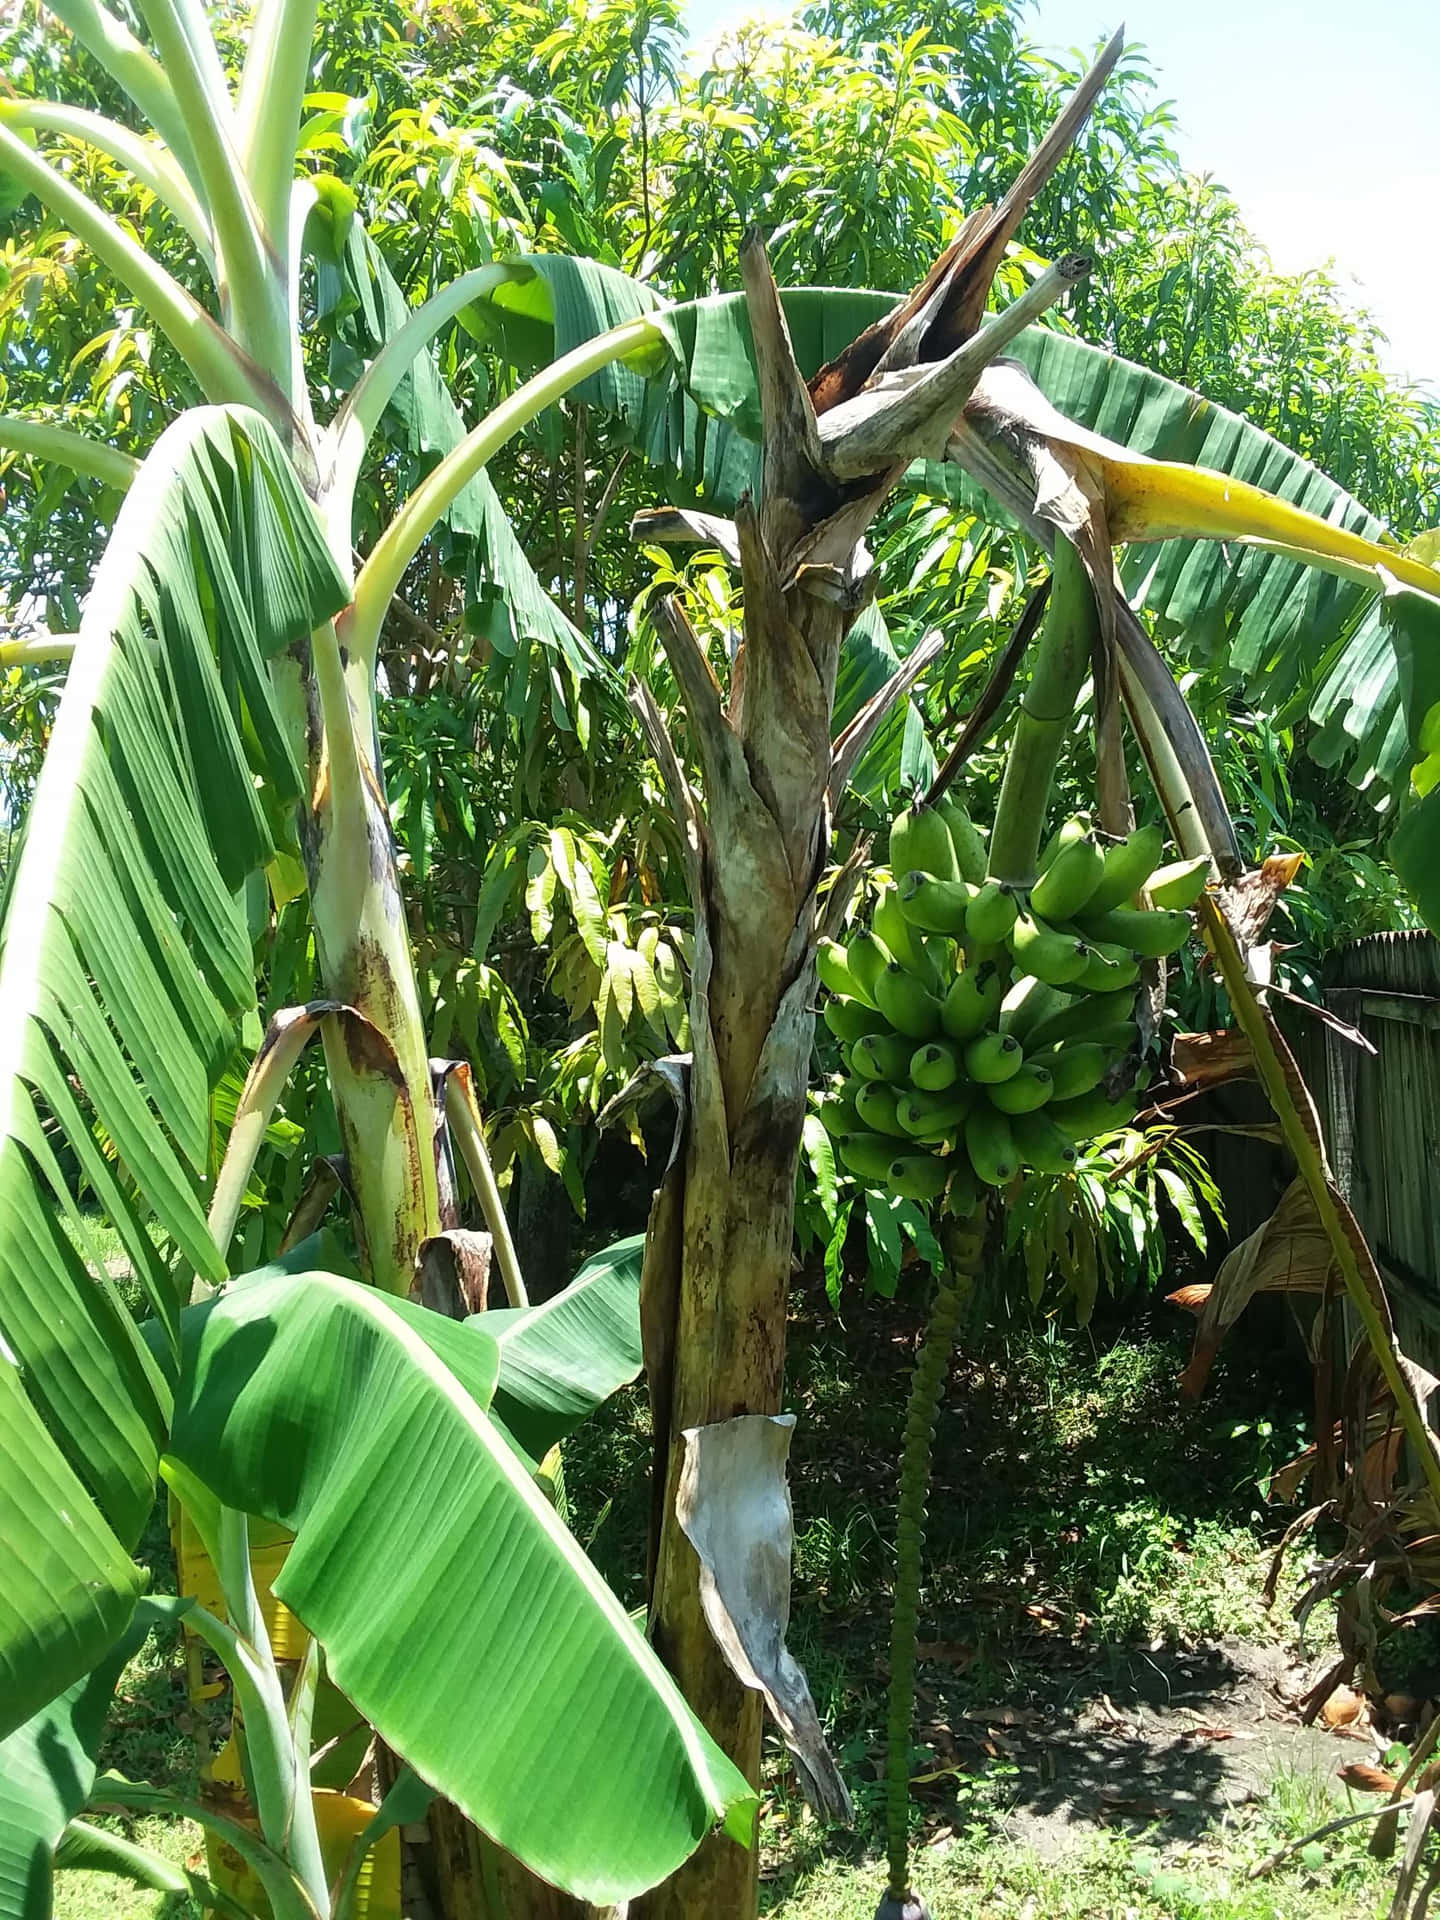 An Oasis of Colorful Fruits - A Banana Tree